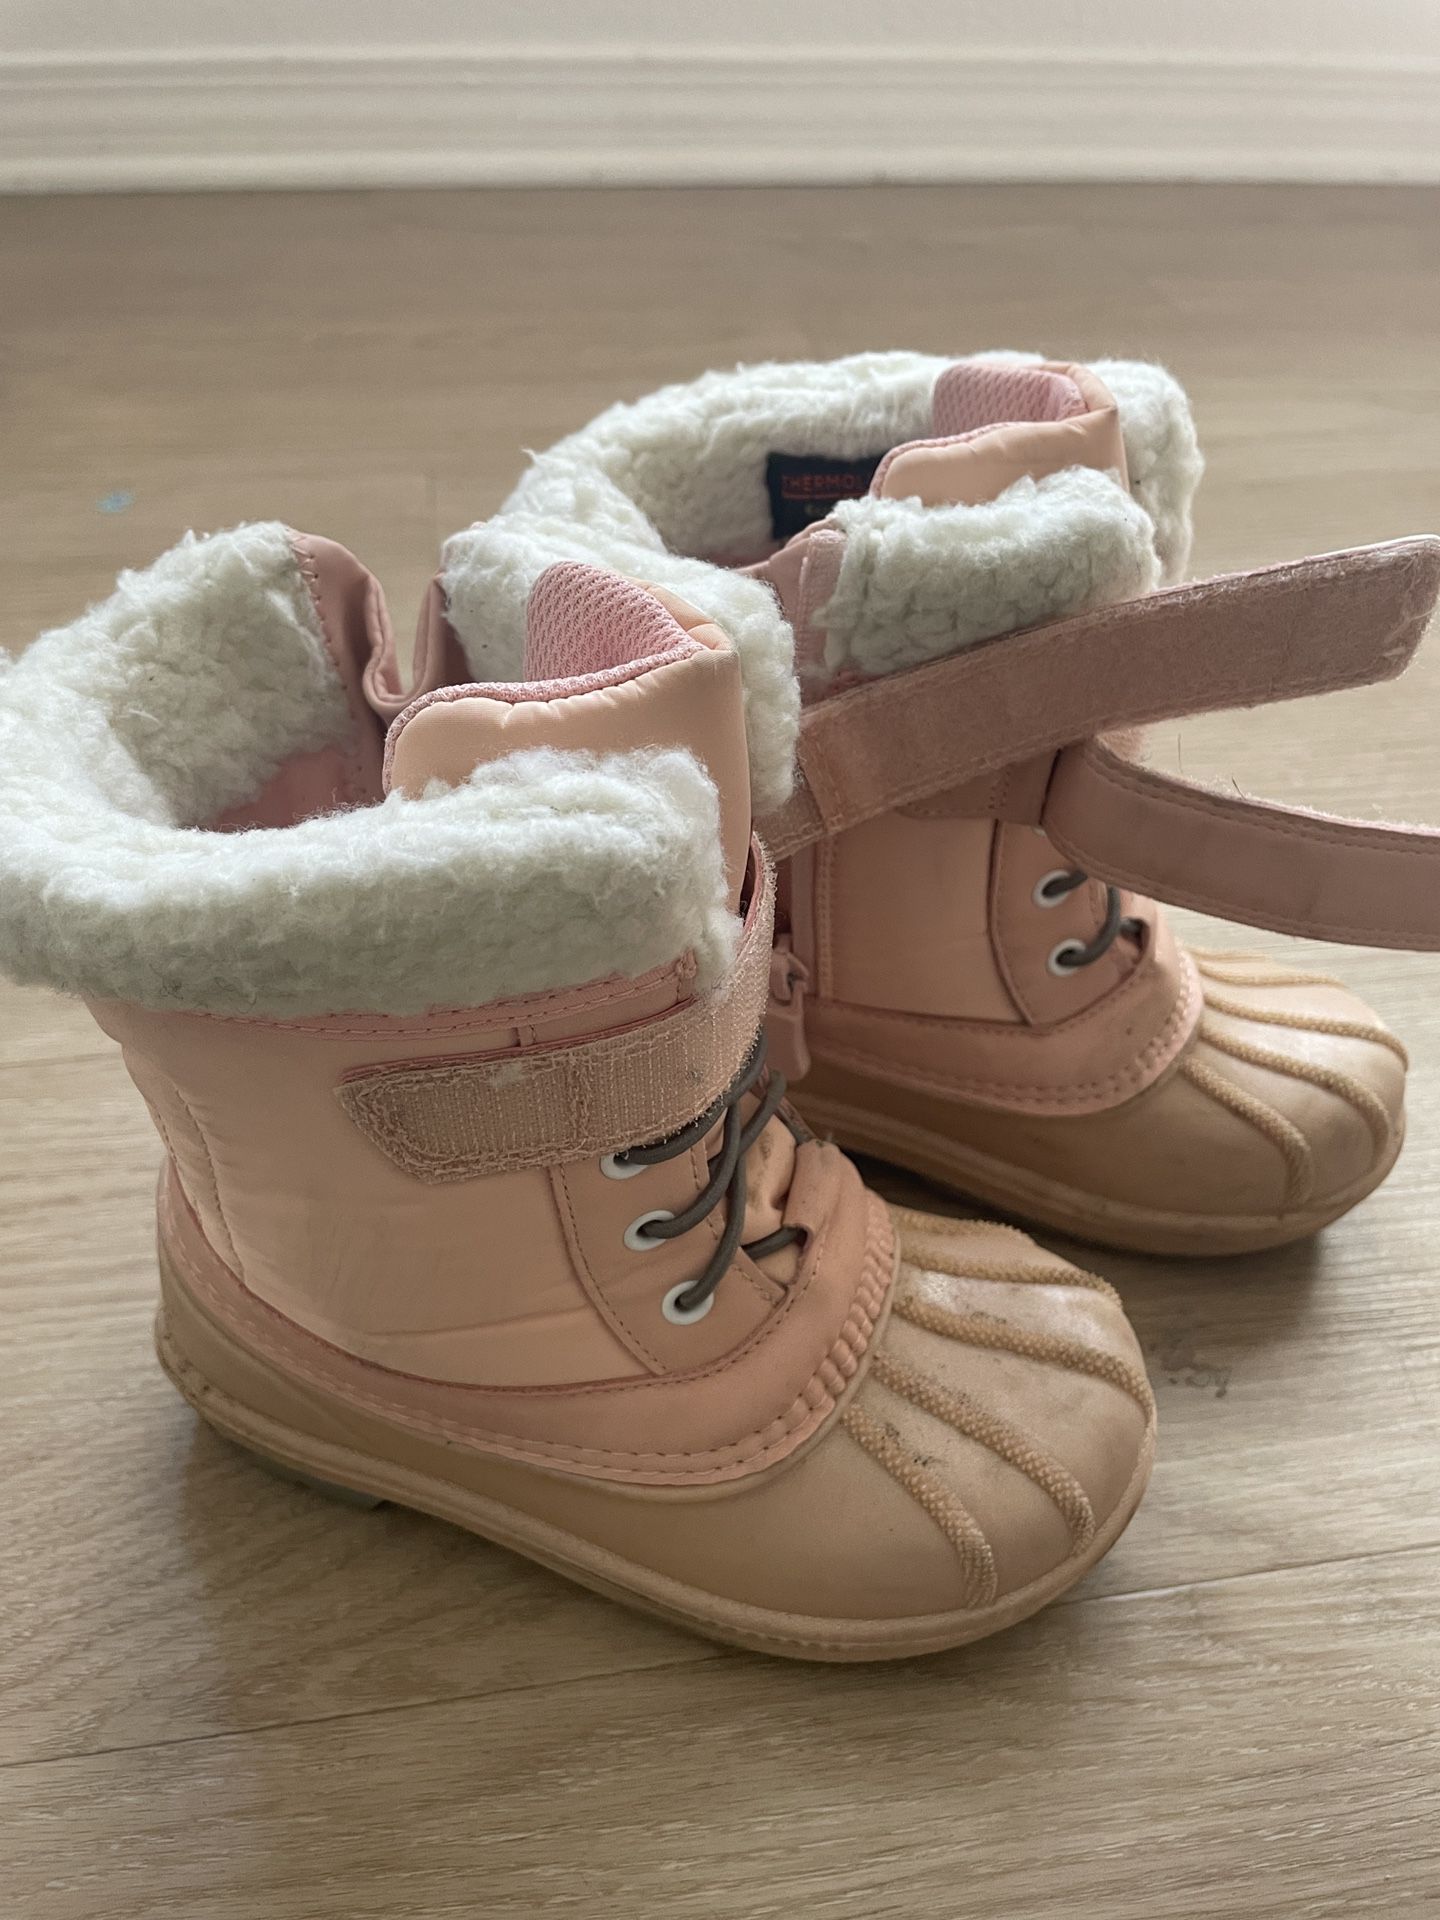 Winter Snow Boots - Girl/Kids - Size 10 - Pink